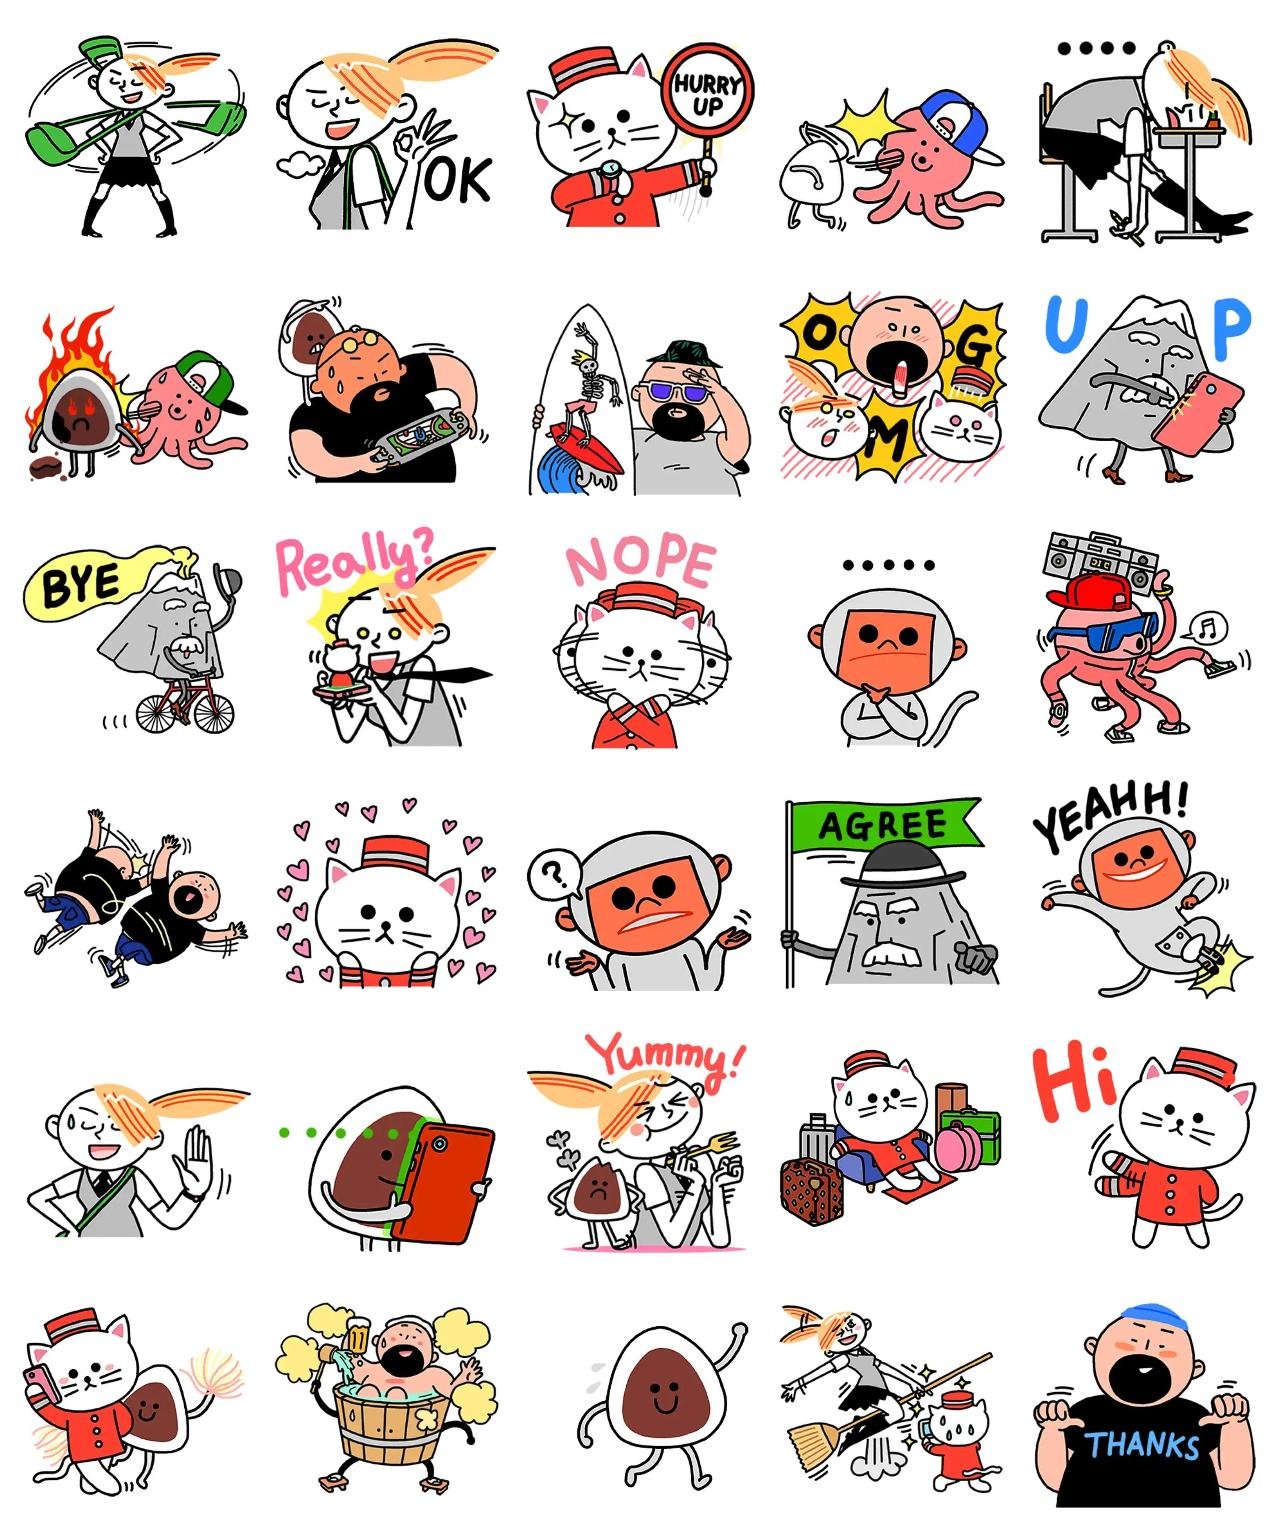 Island J Animals,Gag sticker pack for Whatsapp, Telegram, Signal, and others chatting and message apps